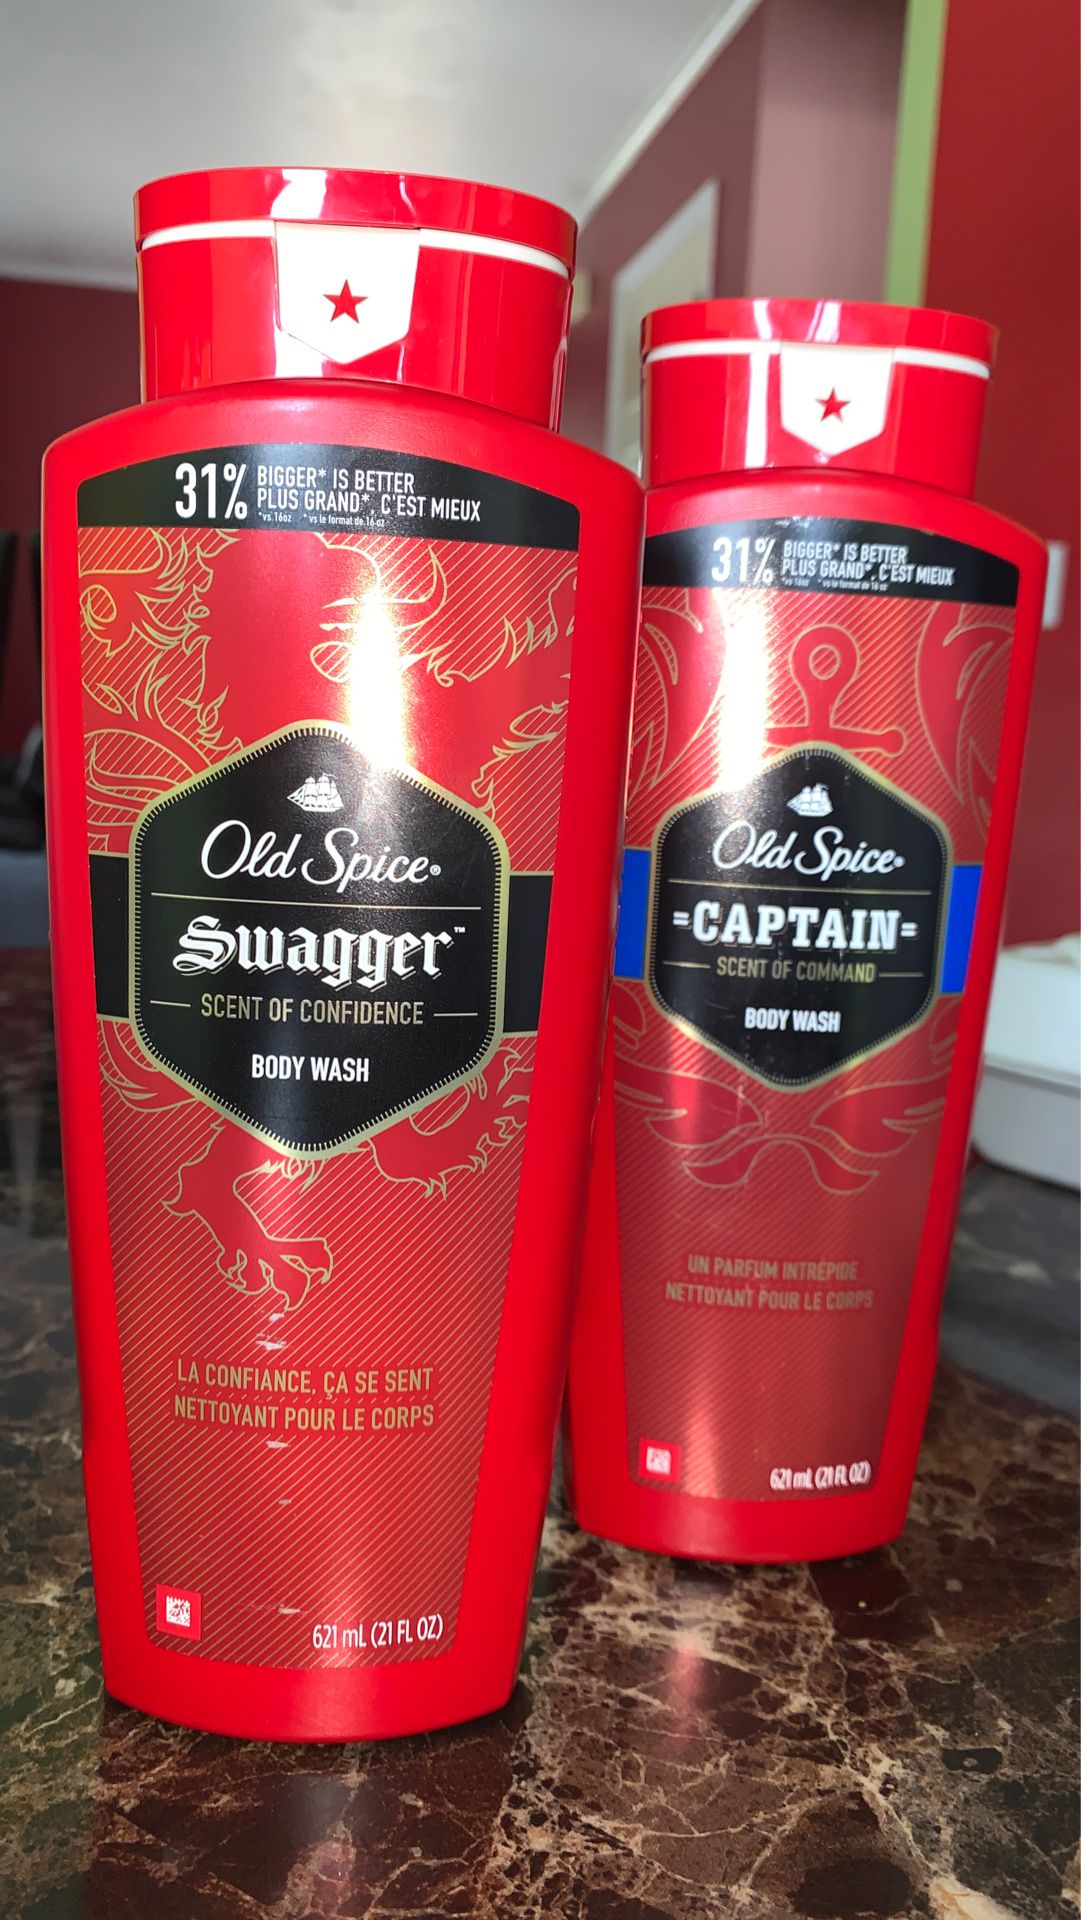 Old spice Body wash